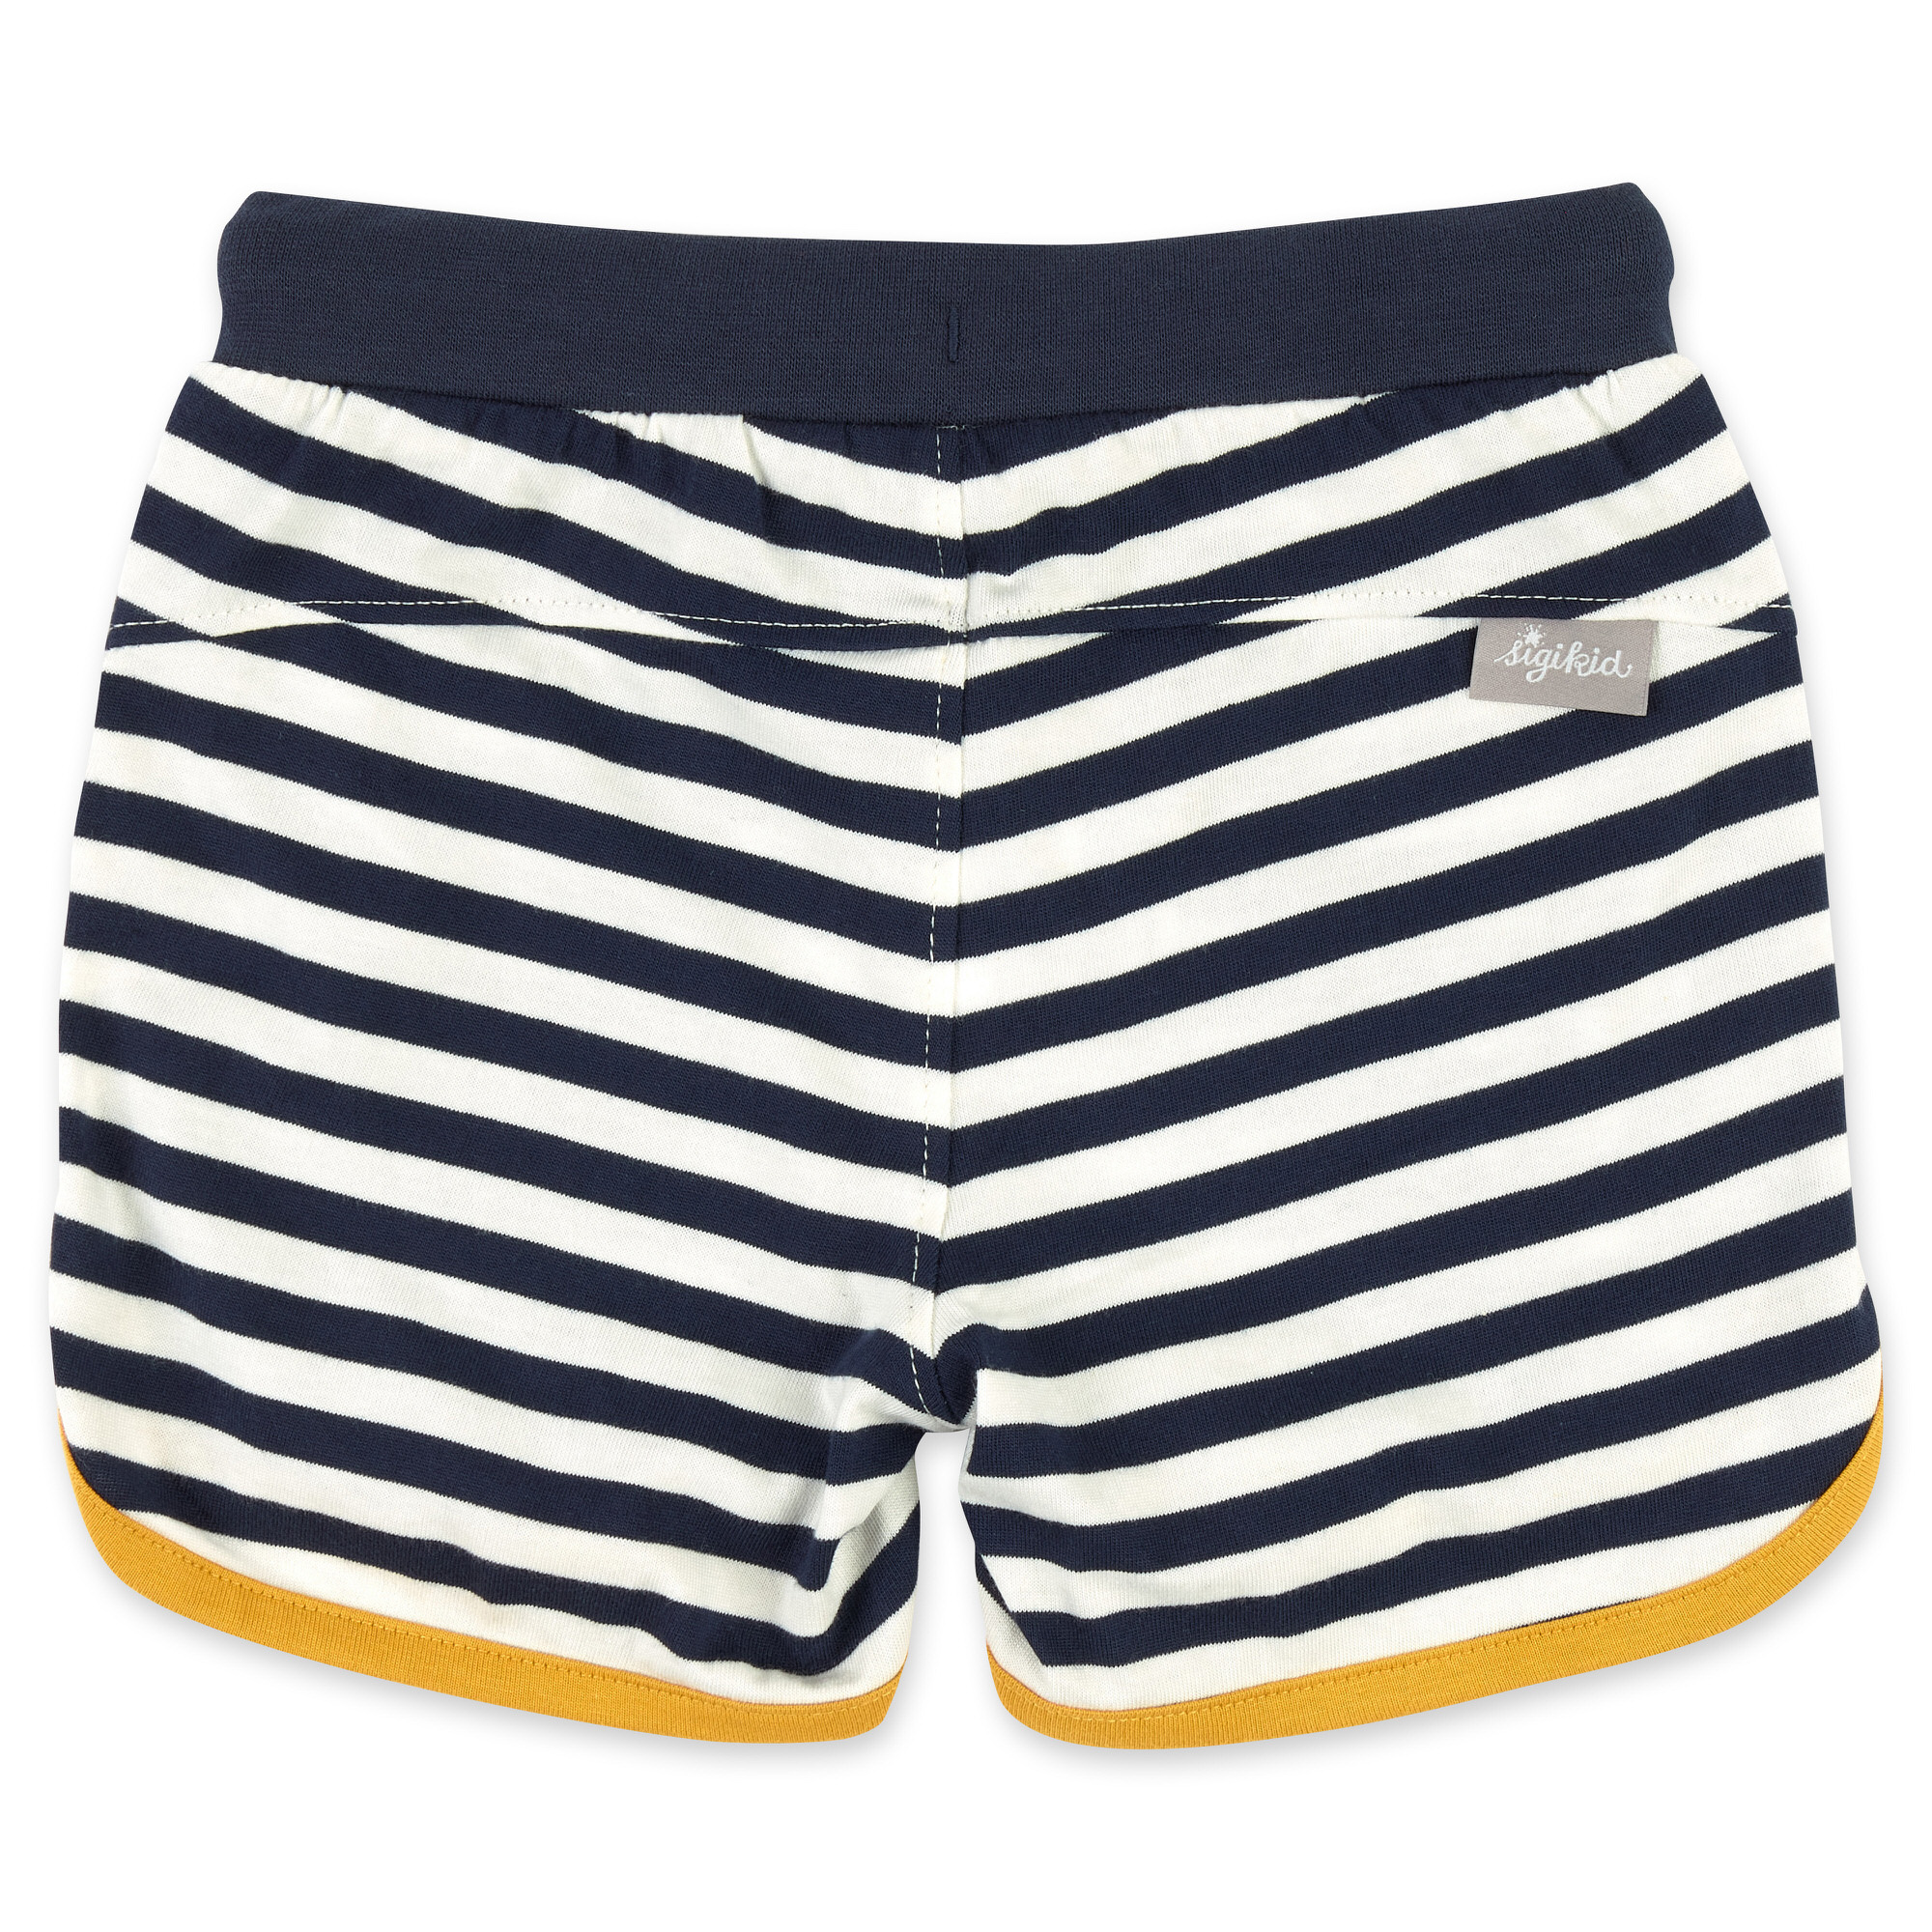 Striped children's short jersey pants navy/white with pockets,